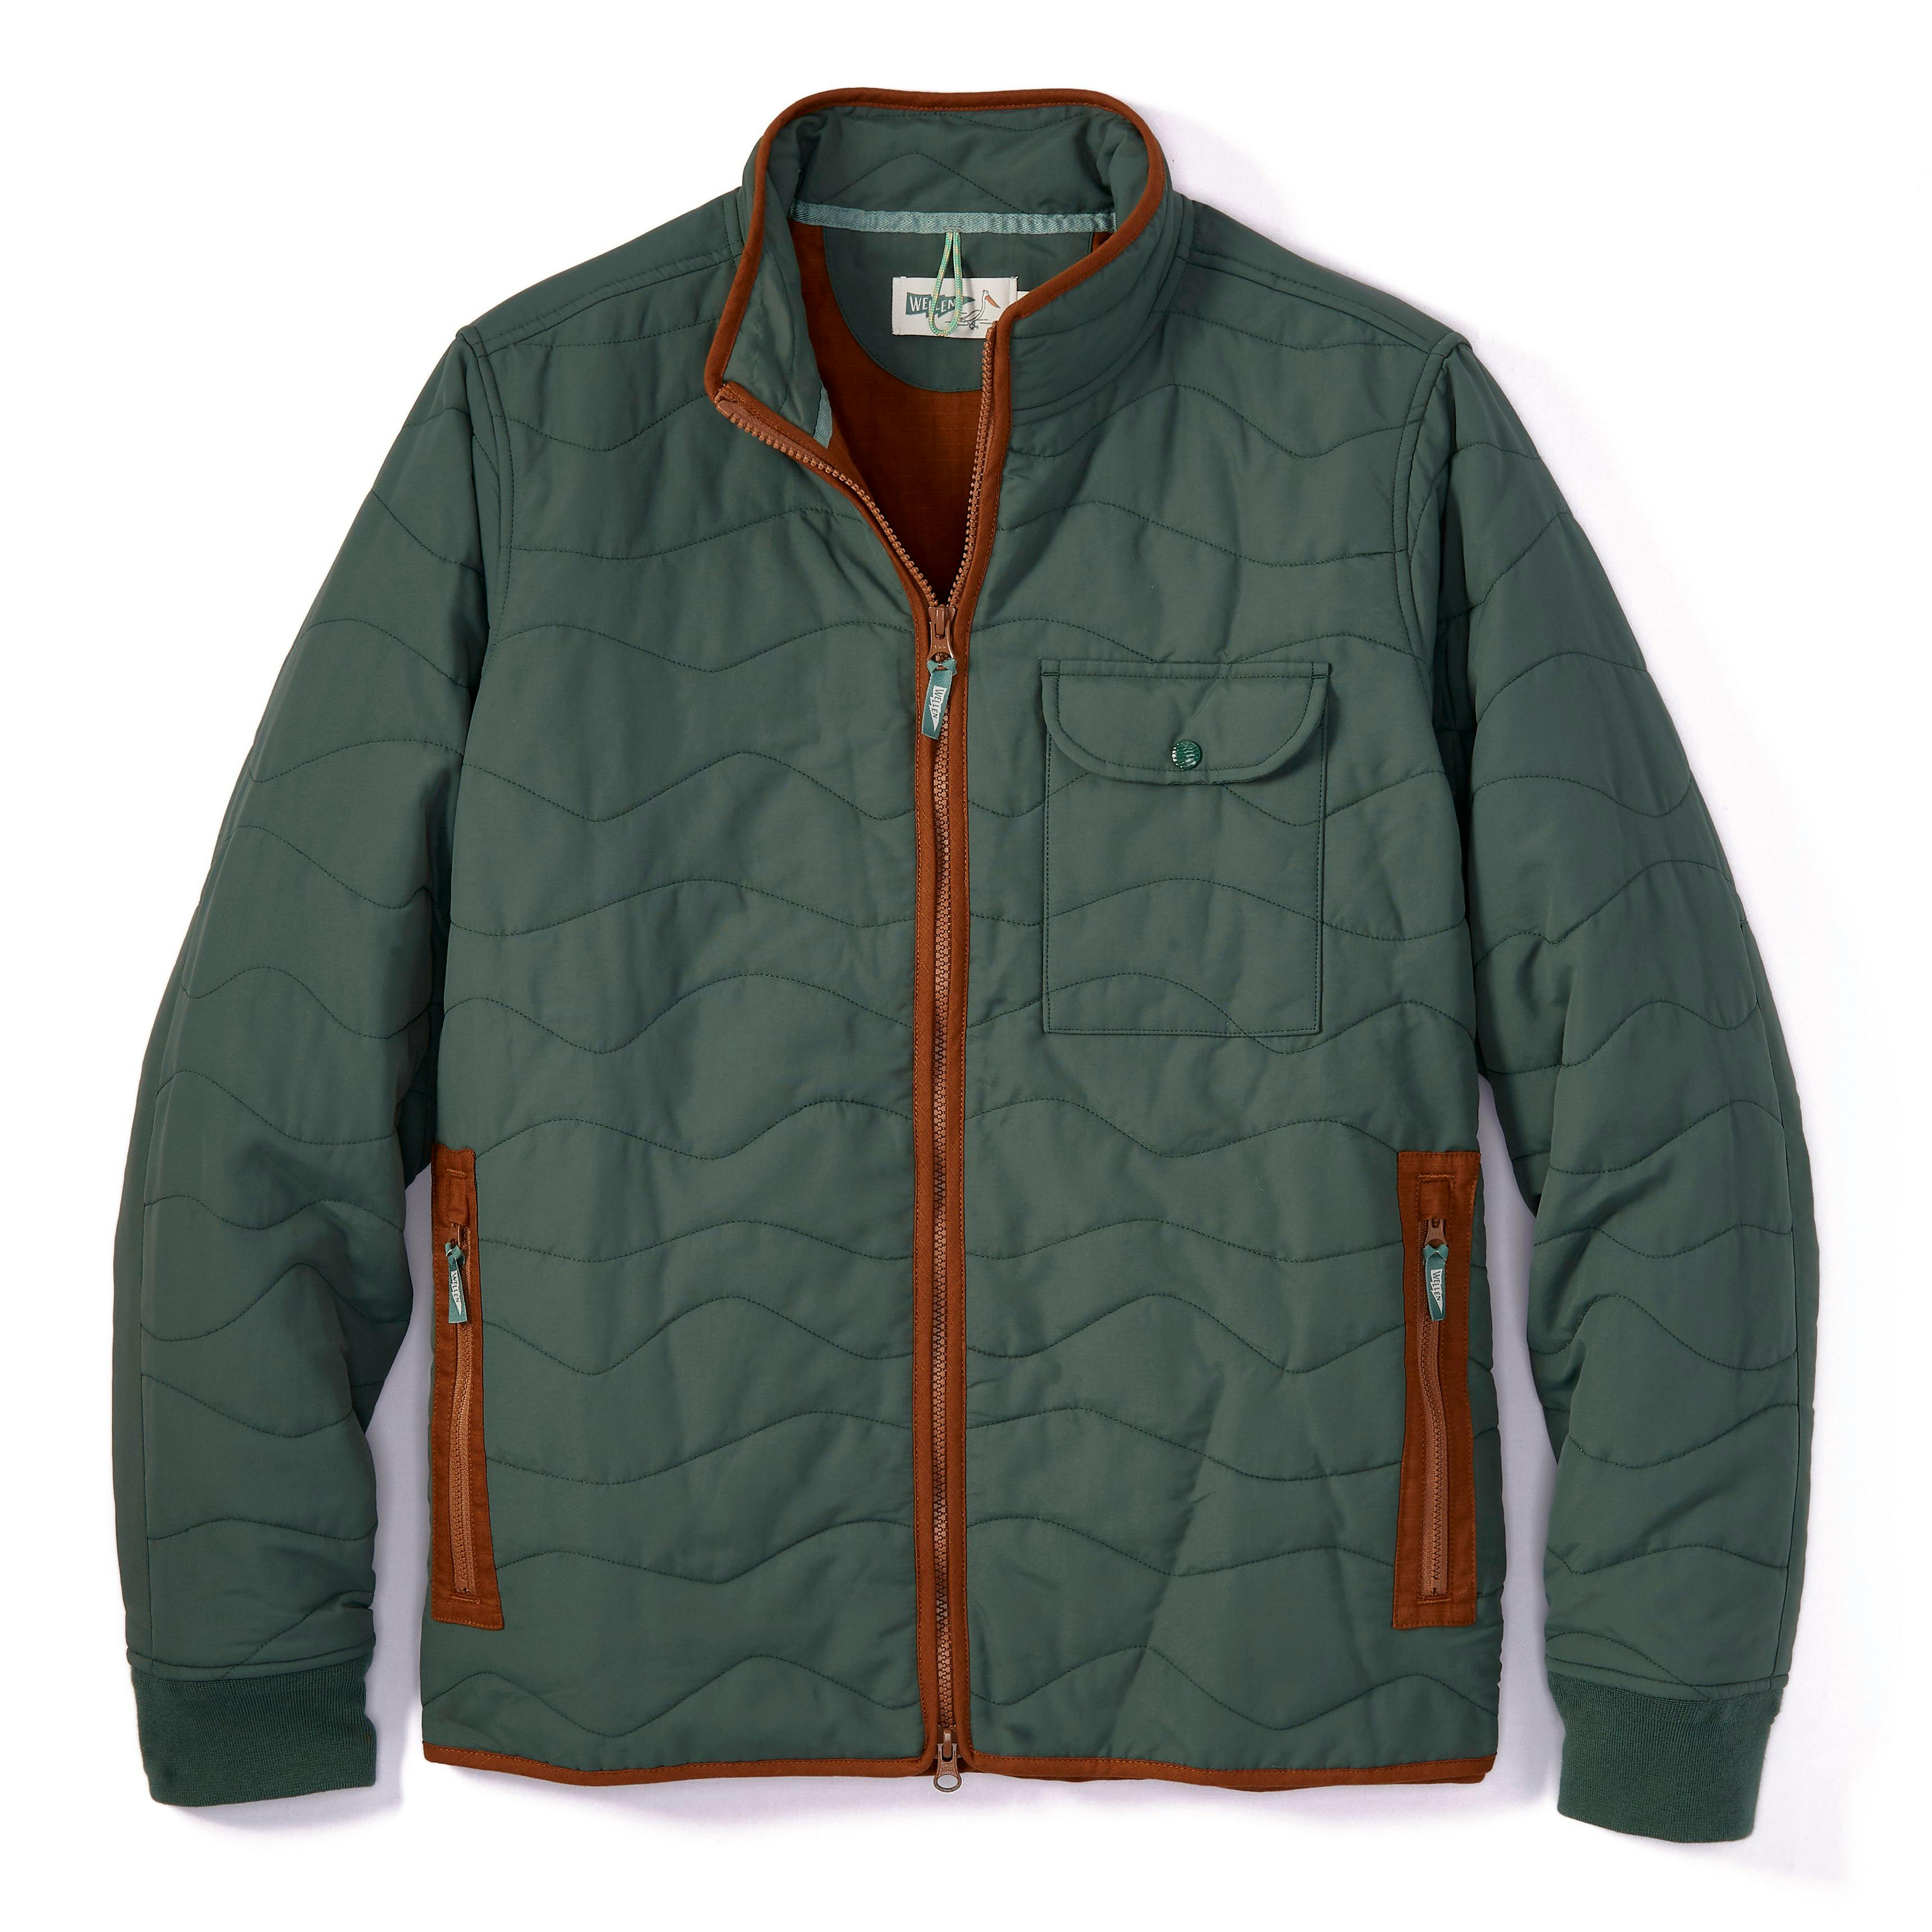 Wave Quilted Jacket